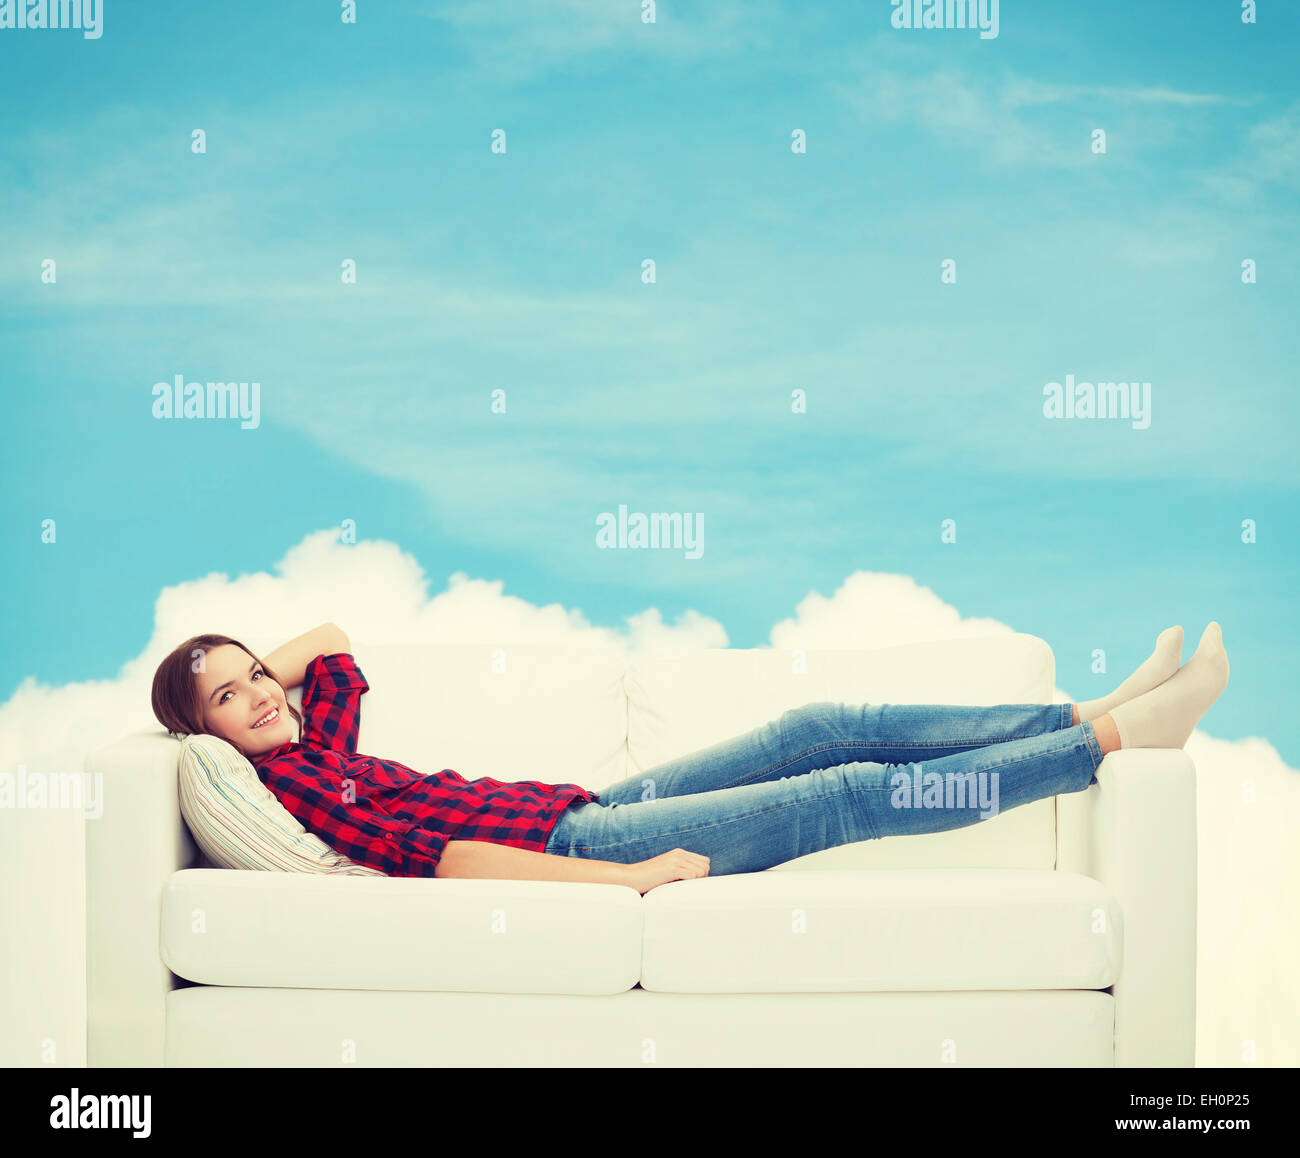 A young girl in underwear with a dreamy expression sitting on a furry  carpet leaning on a cozy sofa Stock Photo - Alamy